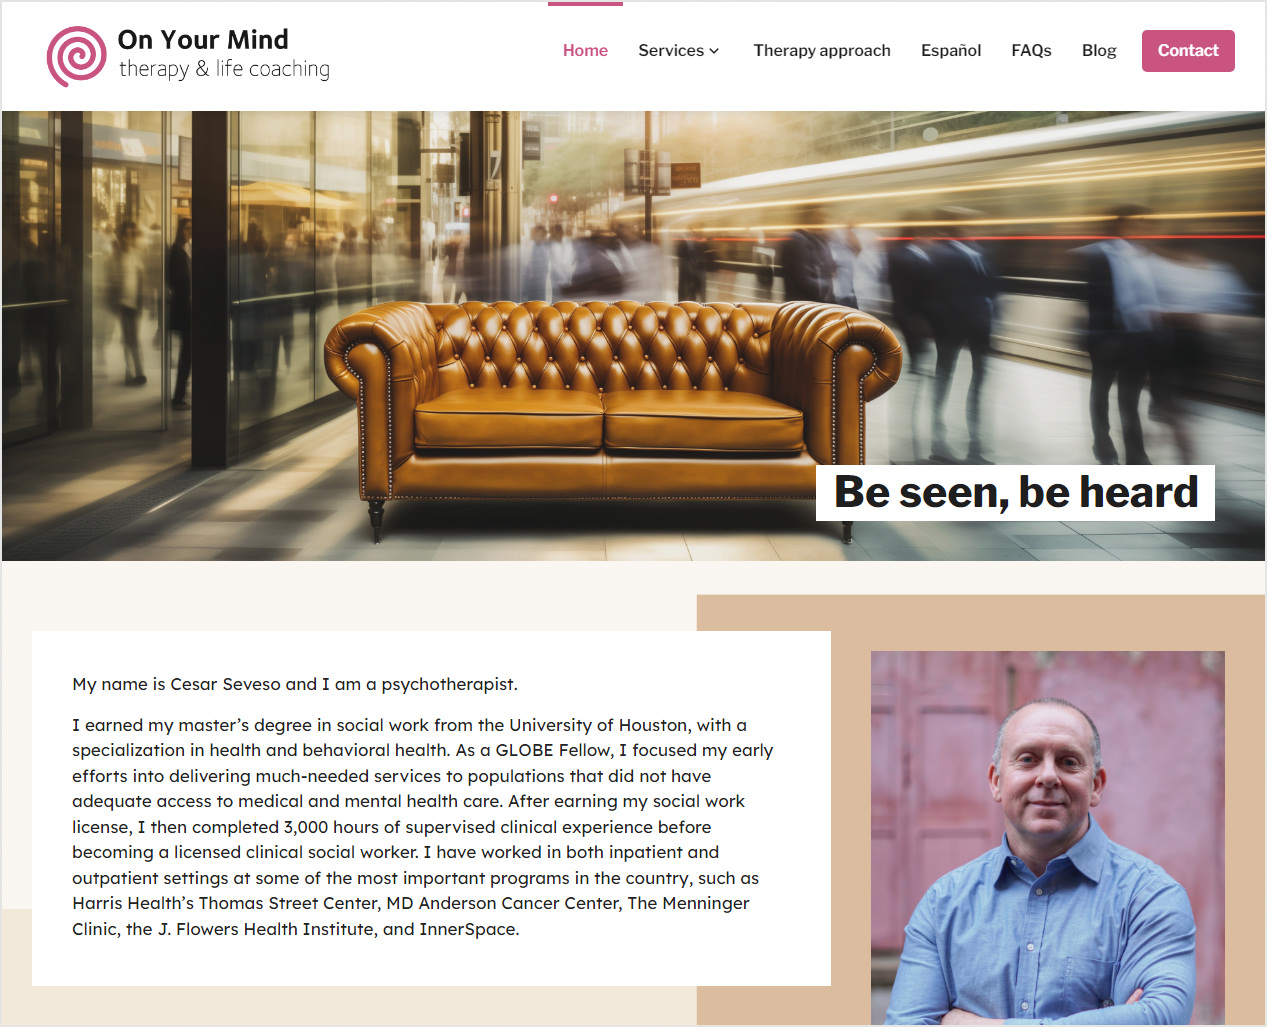 Homepage of On Your Mind, a website for a Houston-based psychotherapist